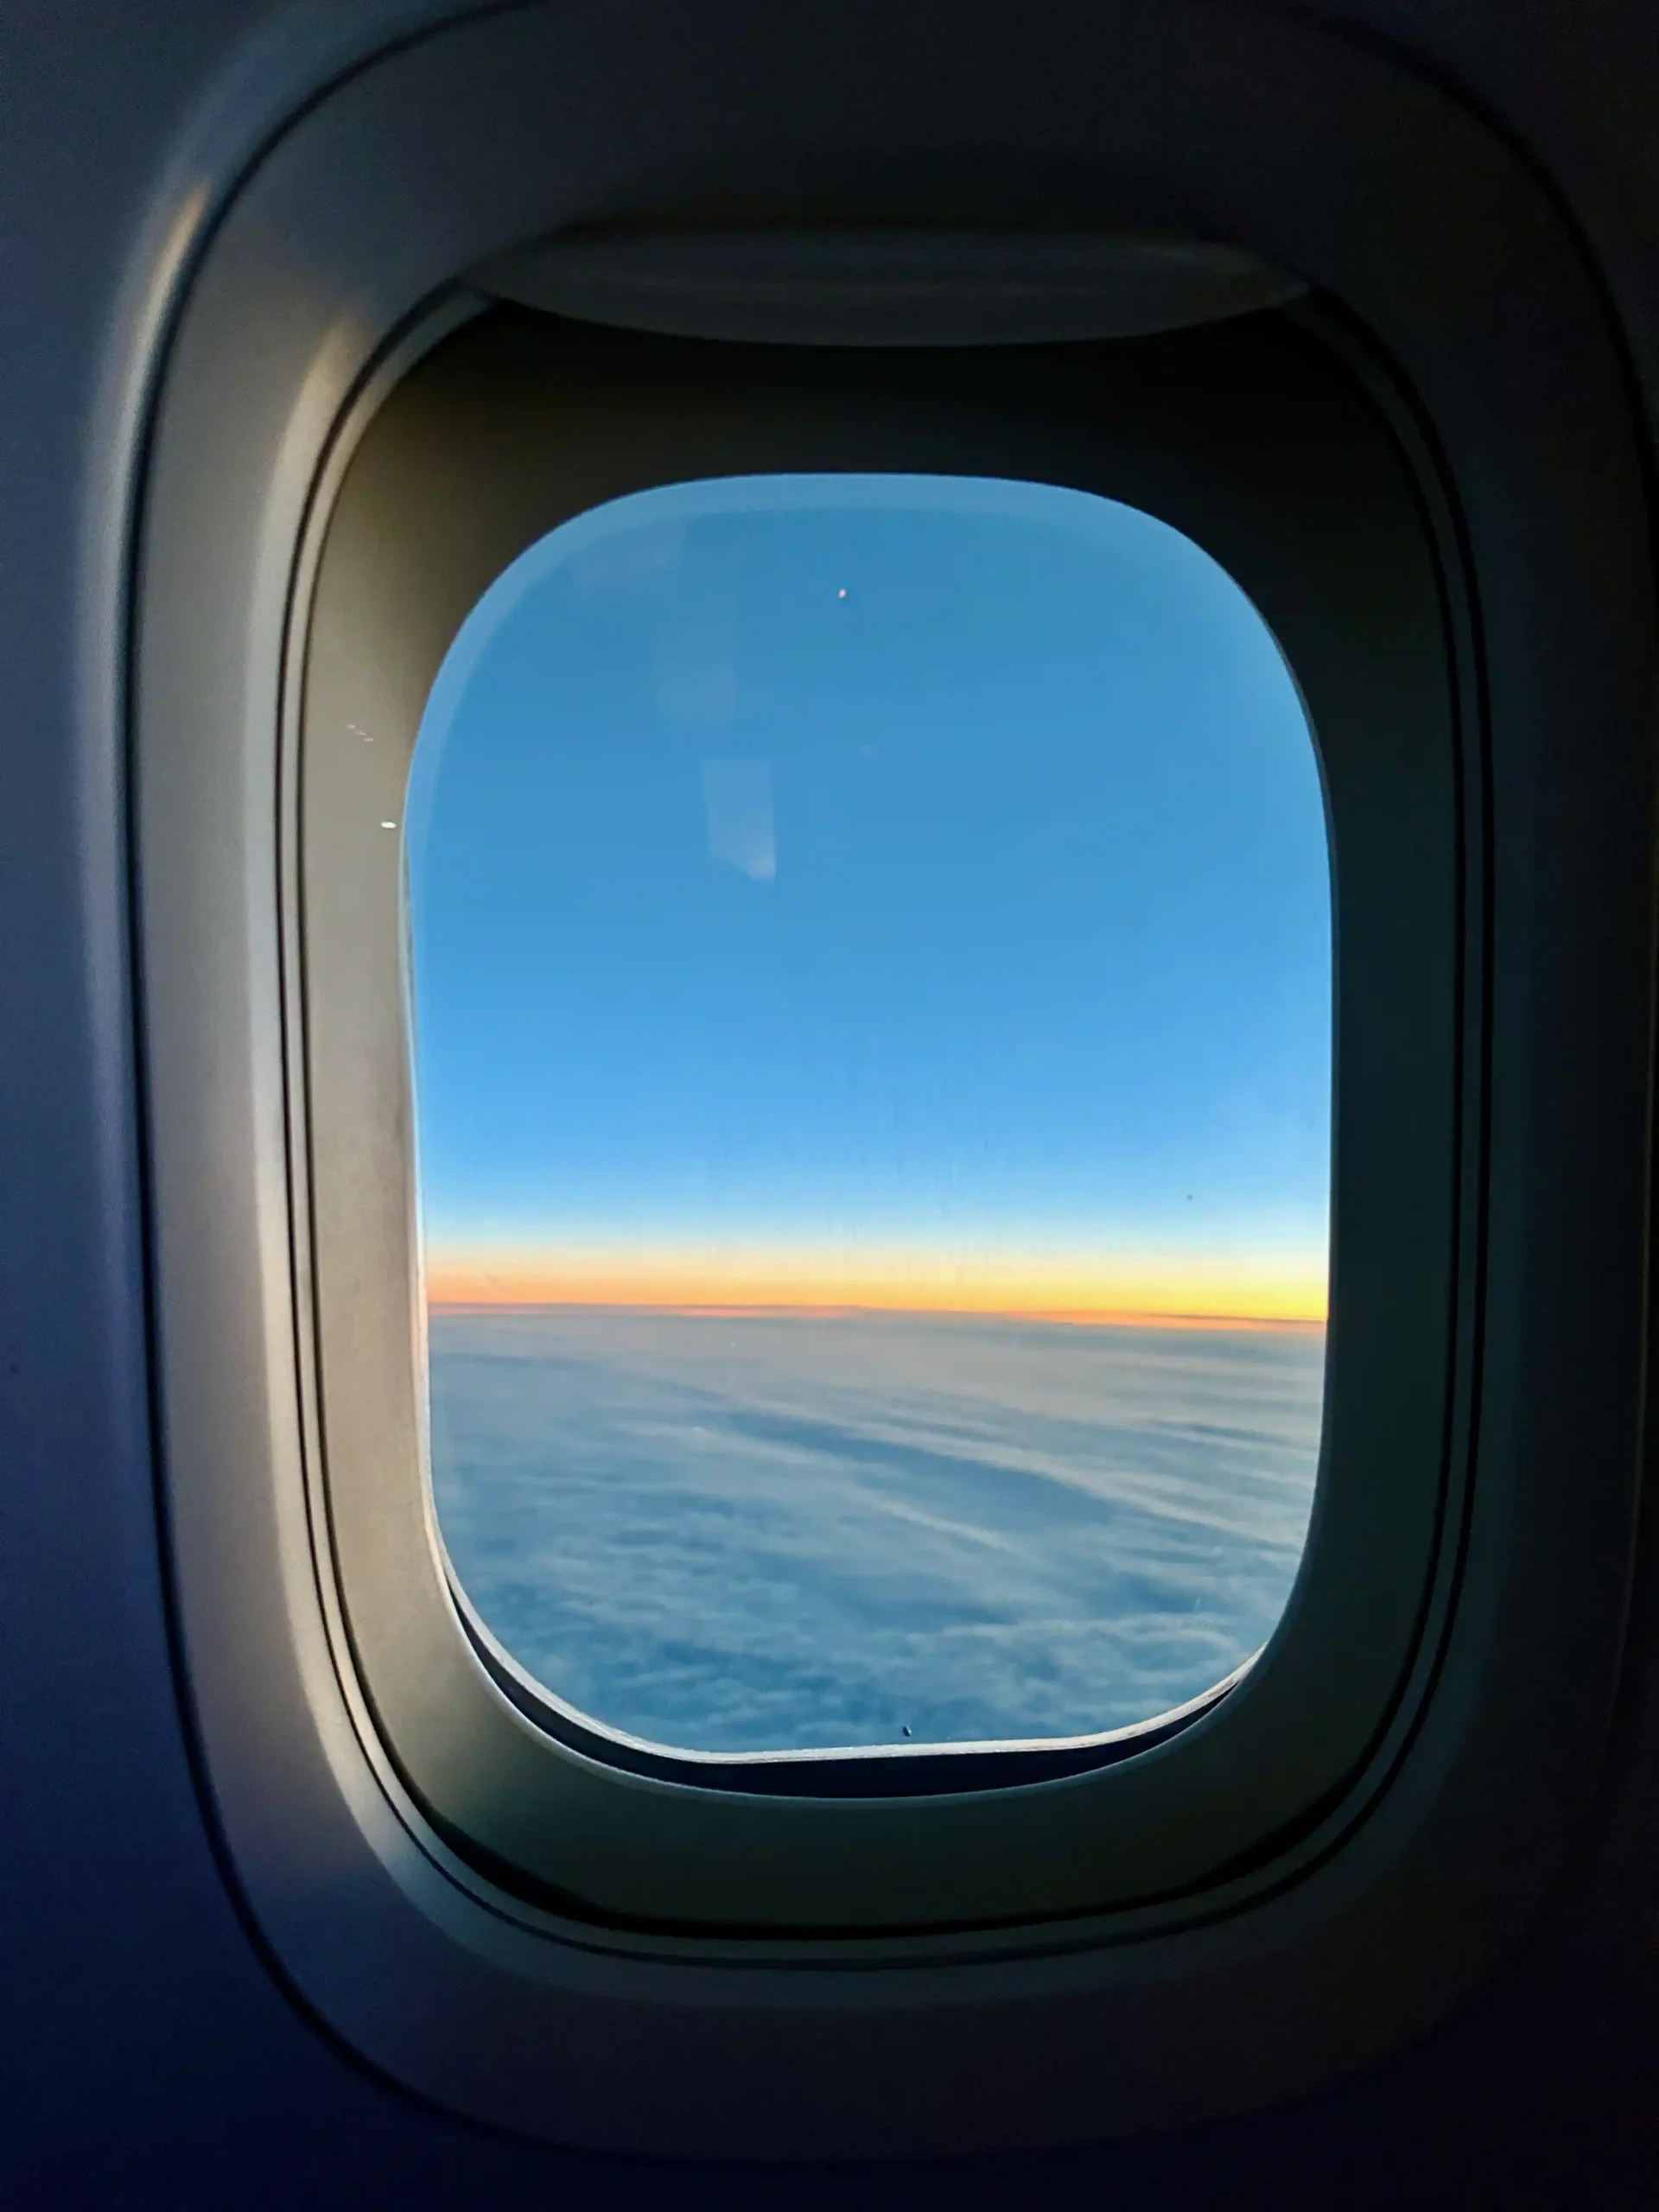 a window of an airplane with a view of the clouds and the sun